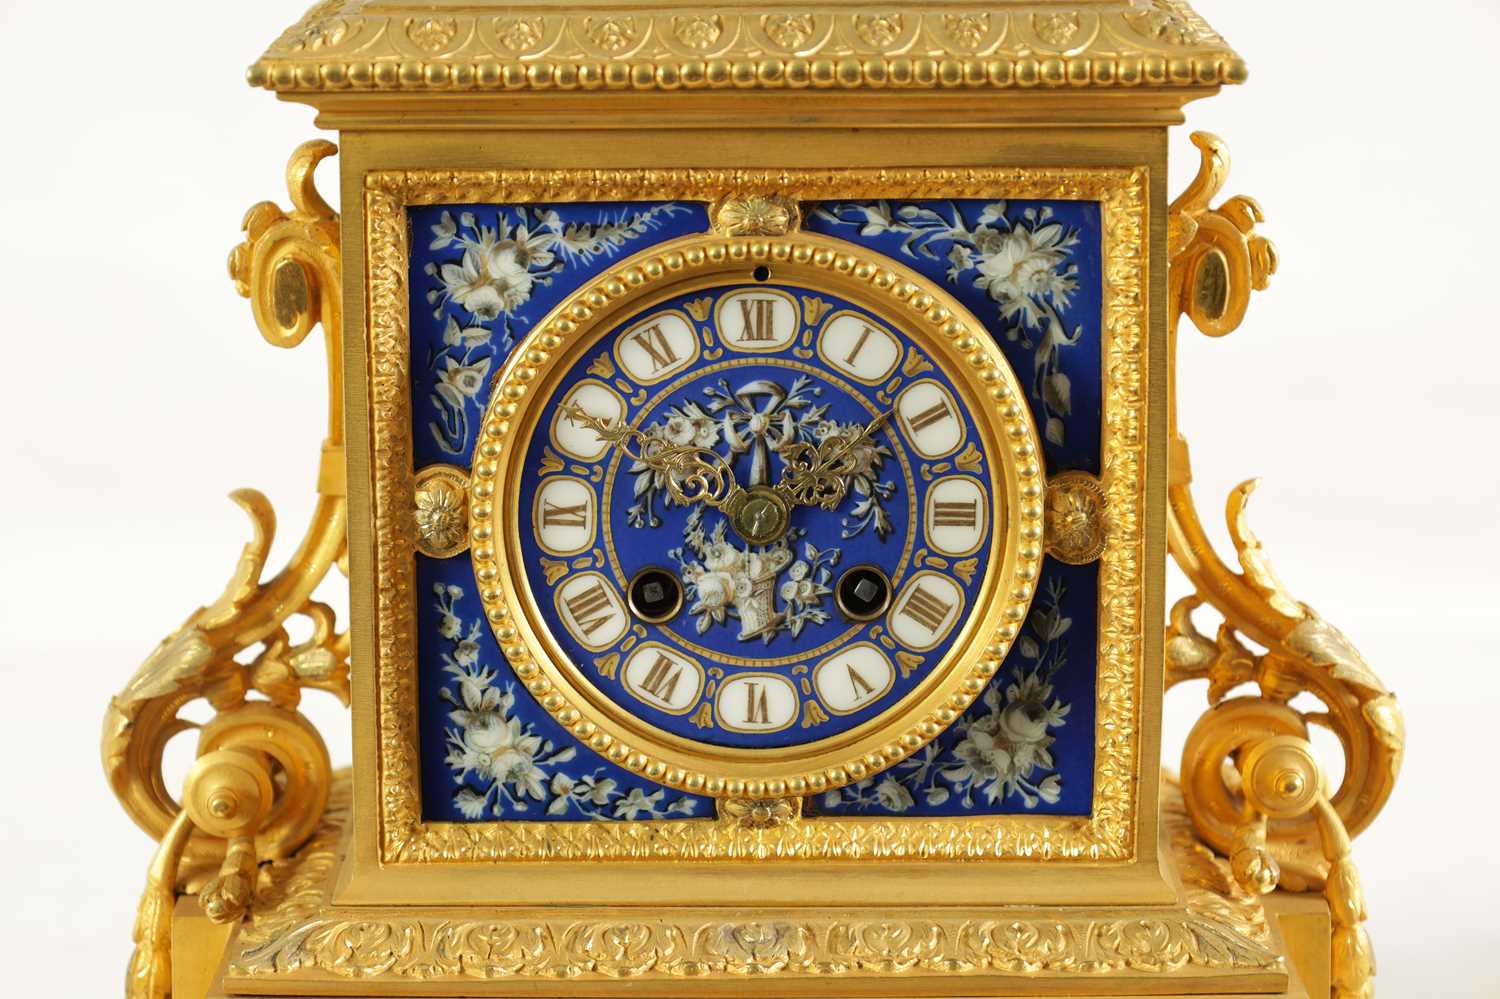 A LATE 19TH CENTURY FRENCH ORMOLU AND PORCELAIN PANELLED MANTEL CLOCK - Image 5 of 9